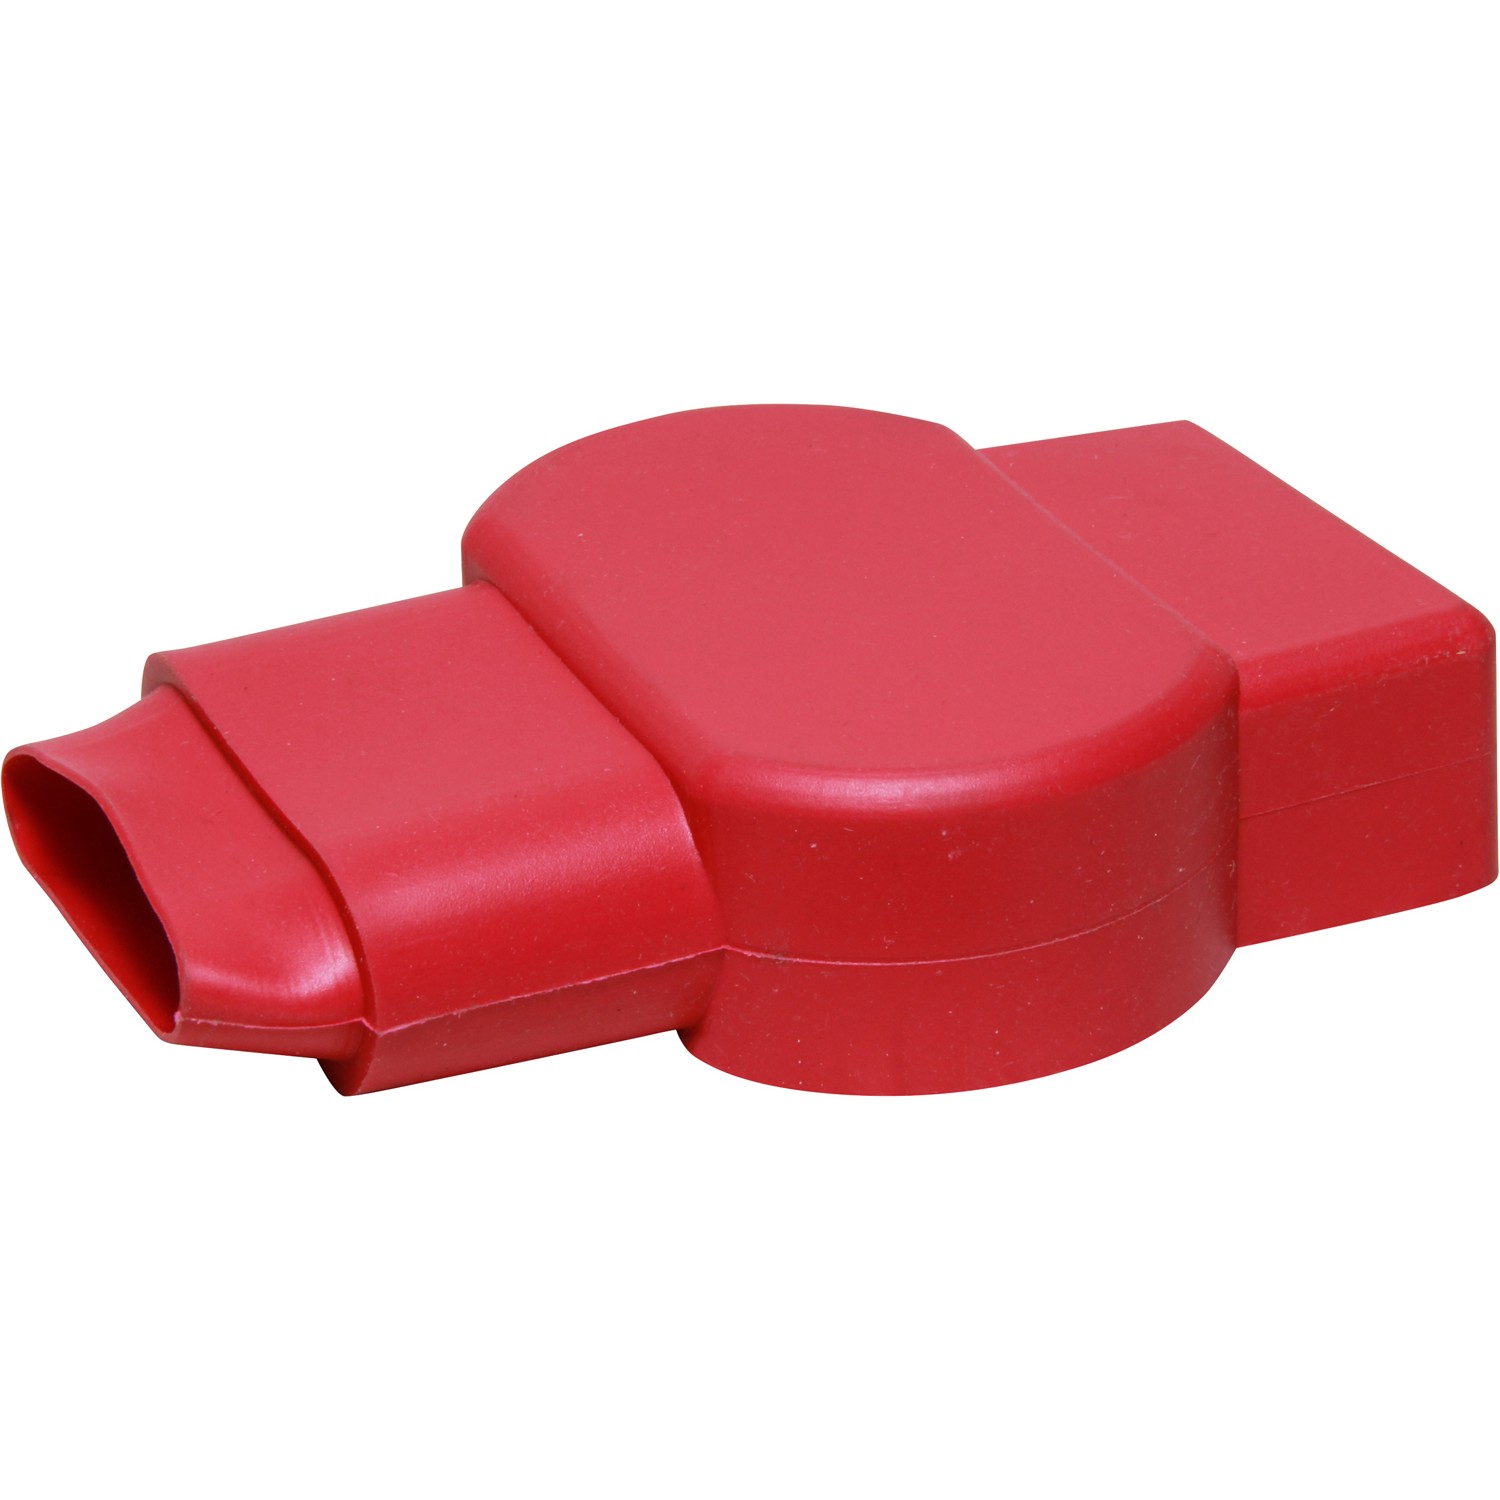 Details about   Battery Terminal Insulating Rubber Protector Covers 14mmx6mm Red Black 1 Pair 